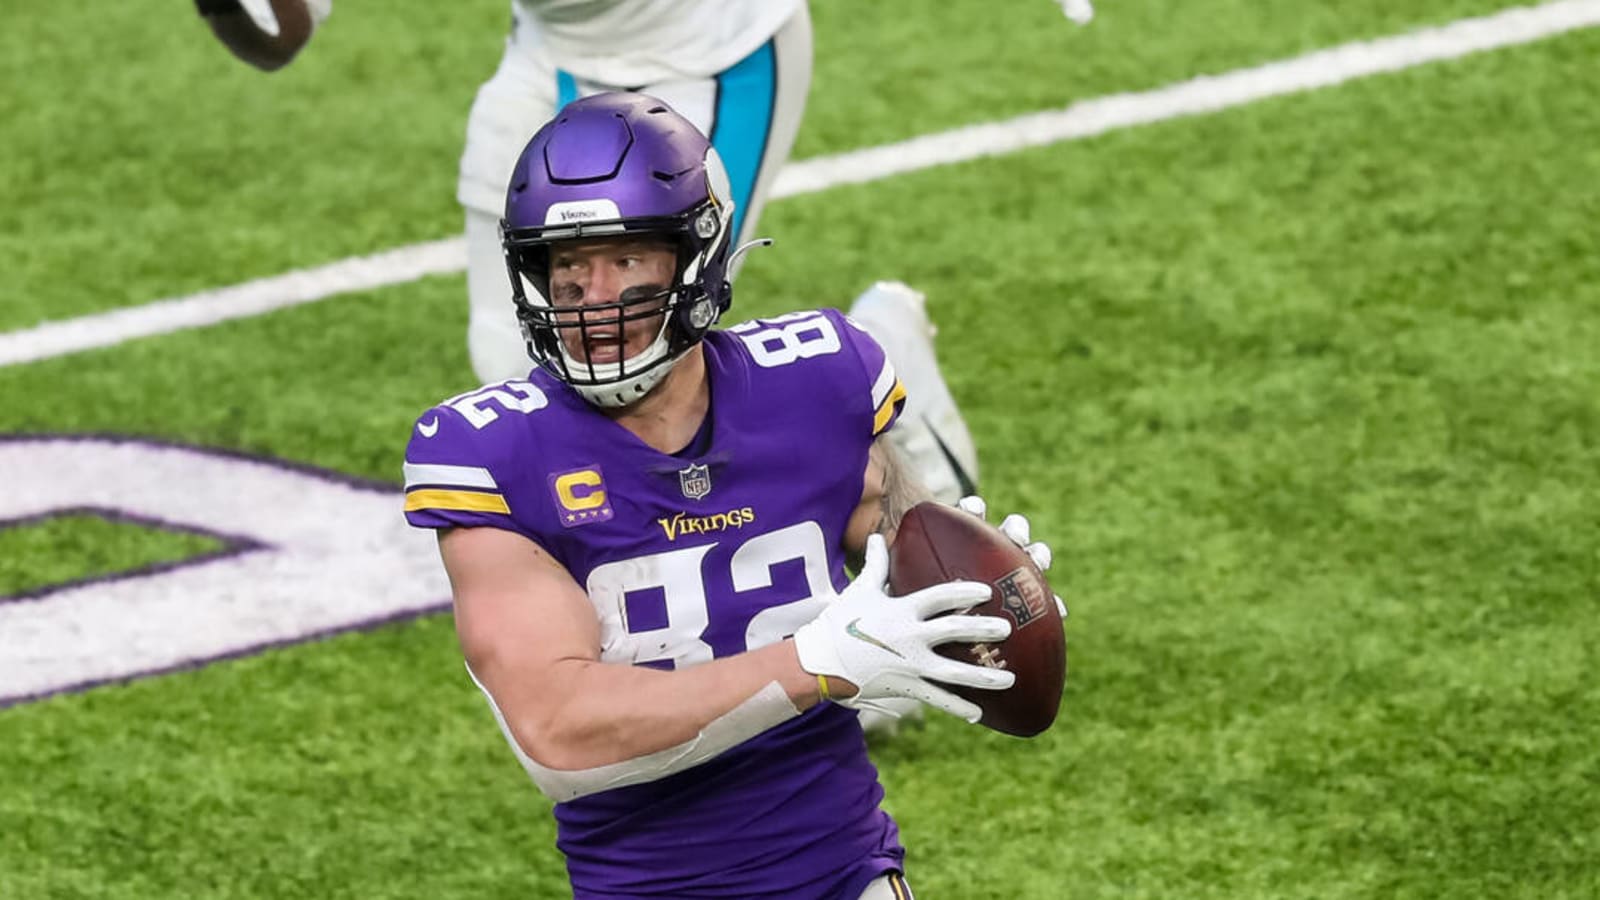 Giants part ways with Kyle Rudolph